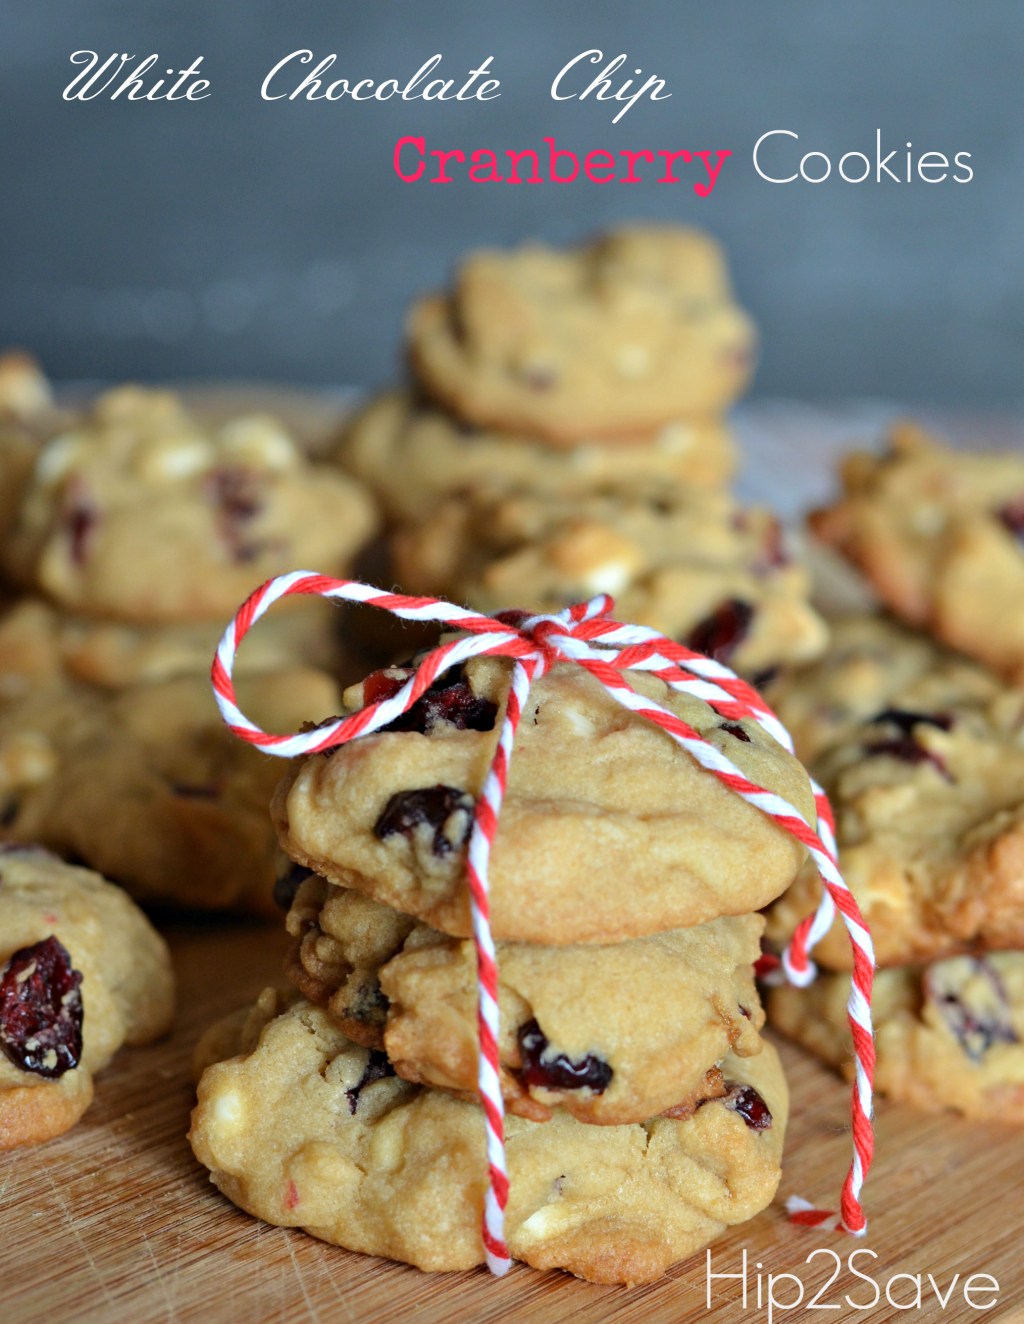 White chocolate chip cranberry Cookies